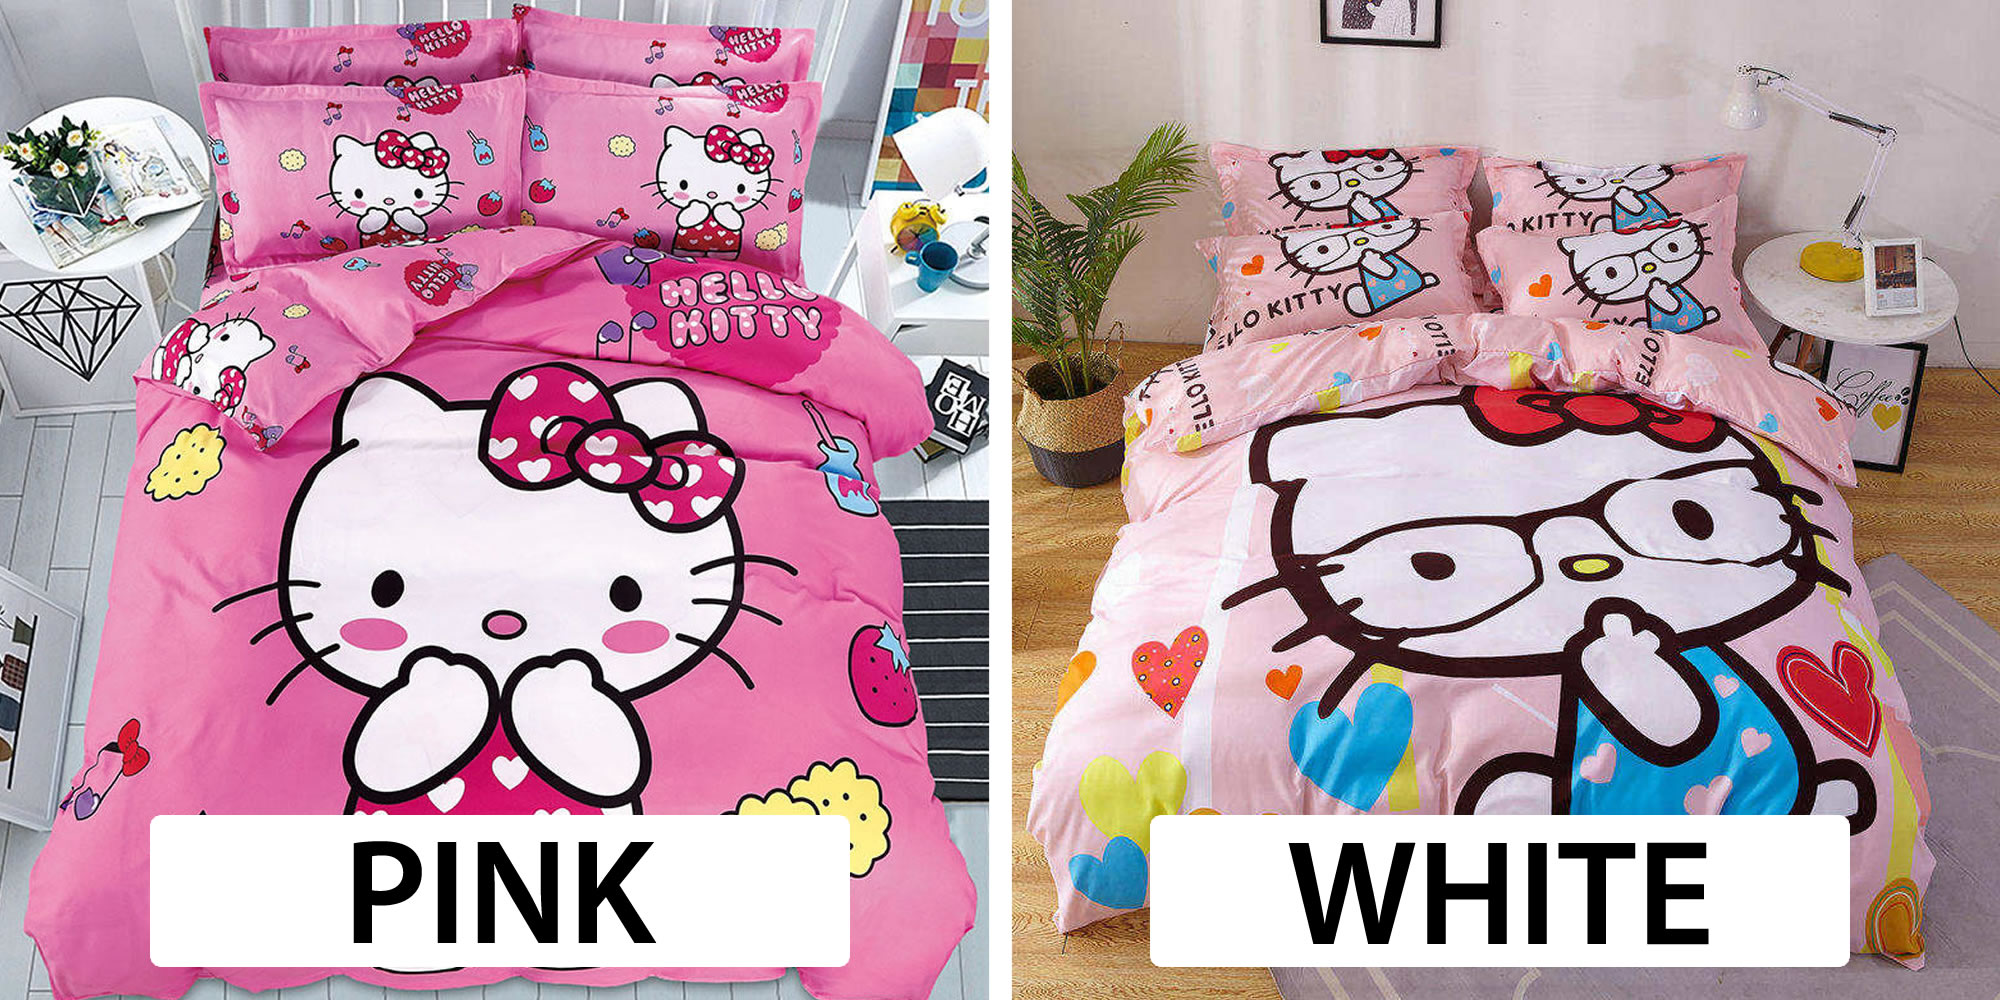 where to buy hello kitty bed linen online